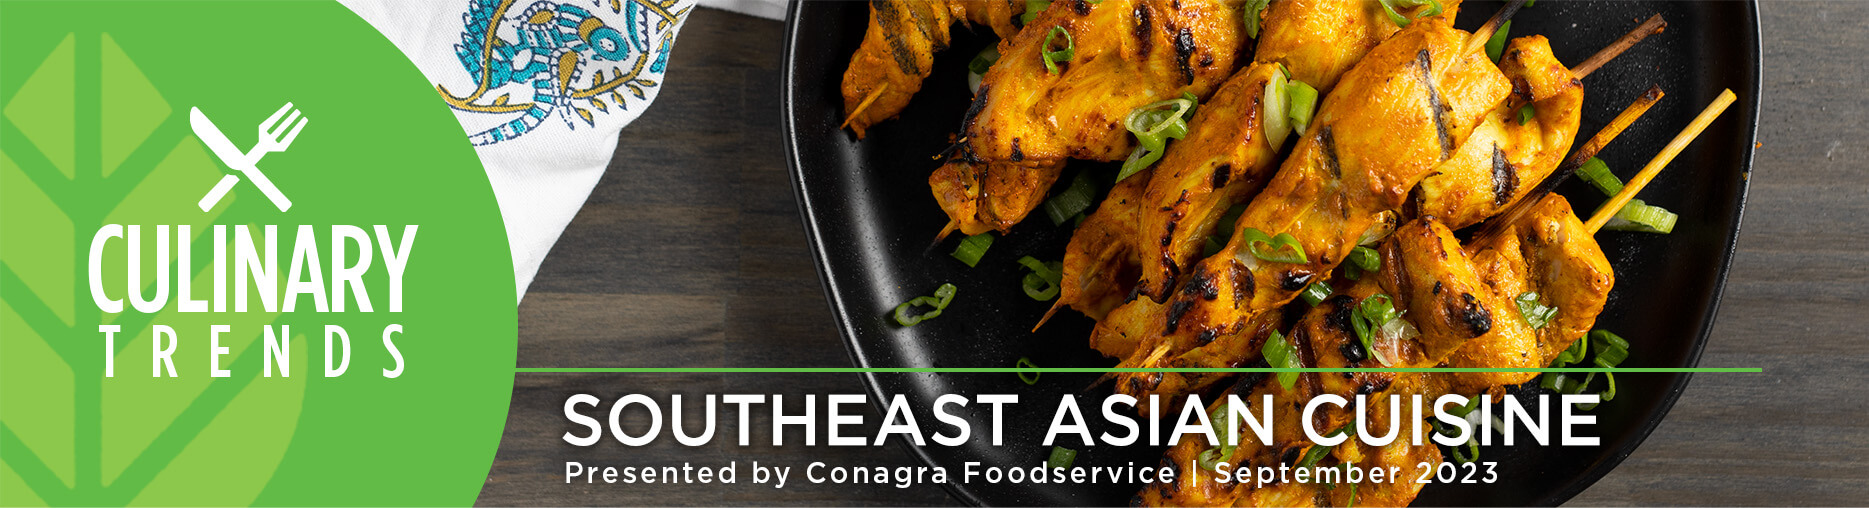 Culinary Trends September 2023, presented by Conagra Foodservice: Southeast Asian Cuisine